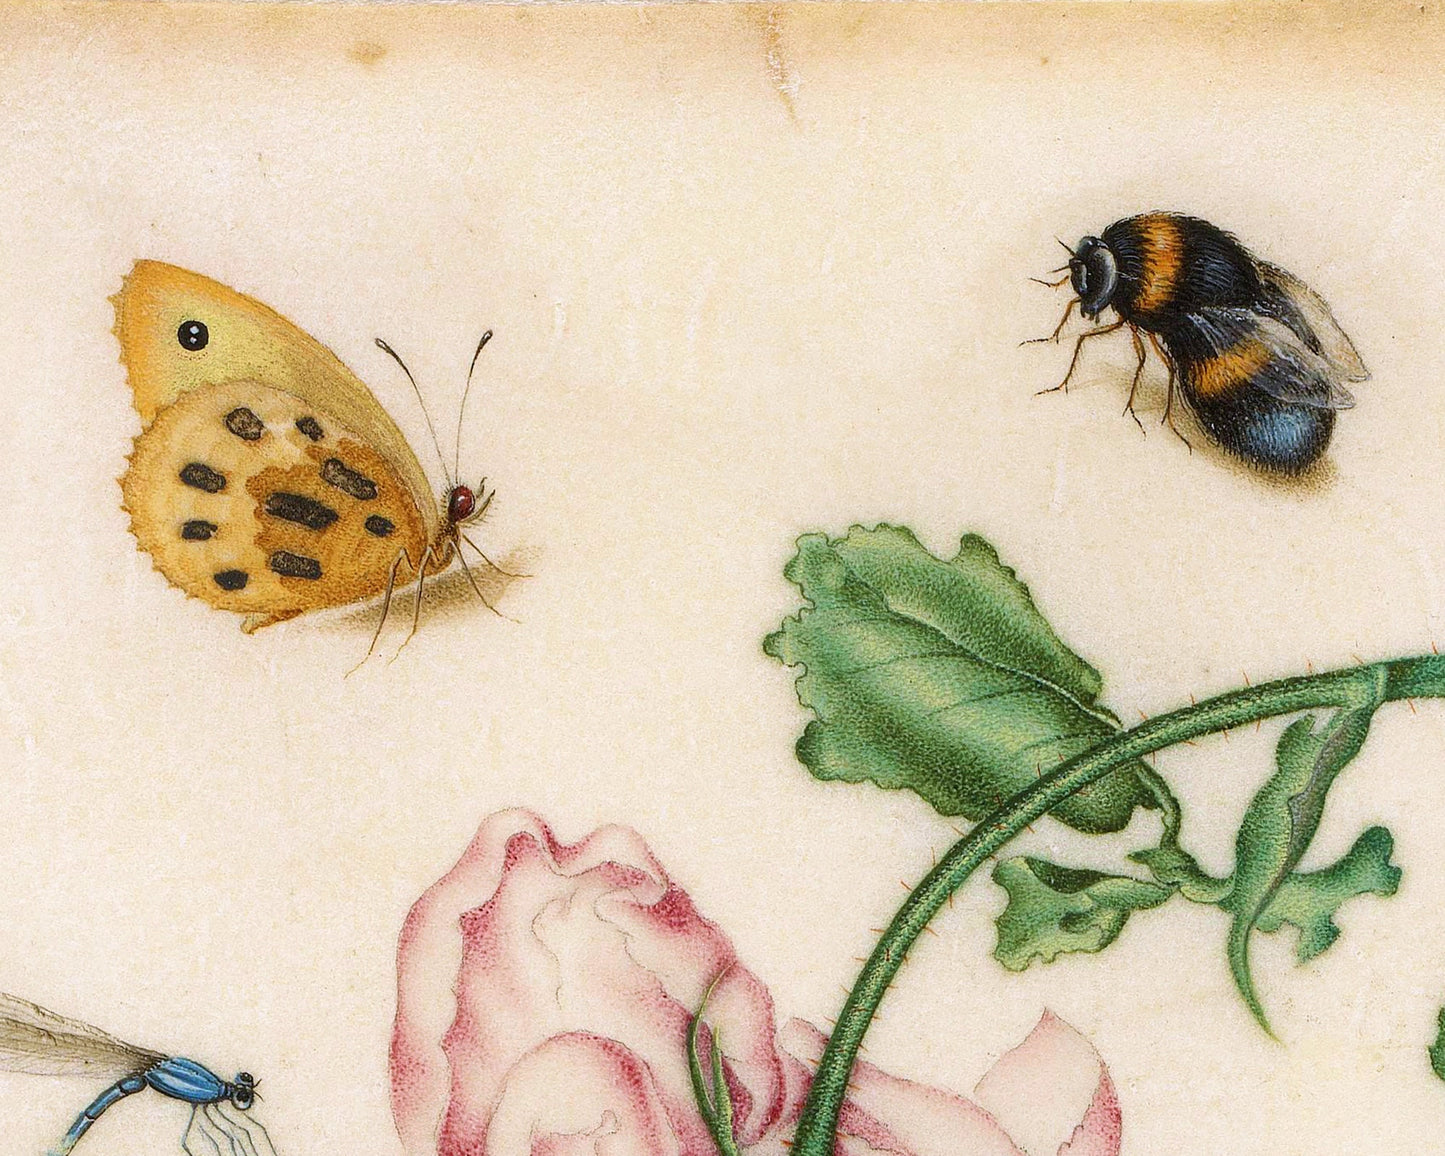 Vintage rose art print | Dragonfly, butterfly, bee, mosquito | 17th century Natural history painting | Eco-friendly gift